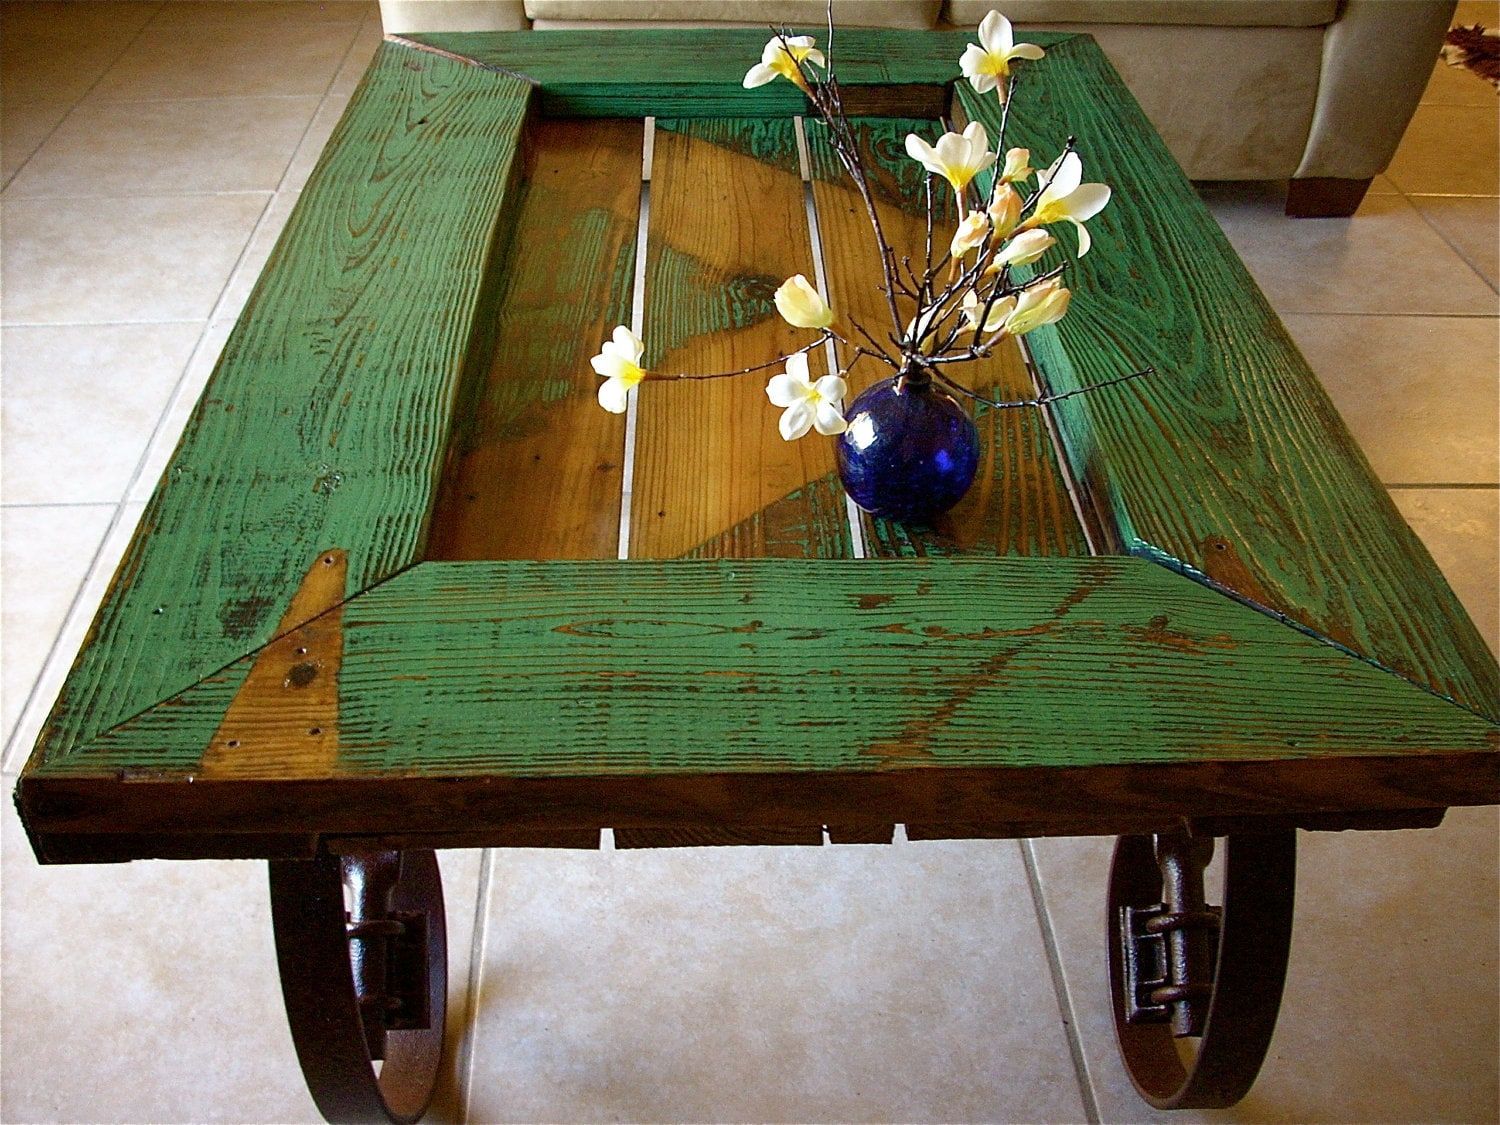 Barn Door Coffee Table Throughout Coffee Tables With Sliding Barn Doors (View 13 of 20)